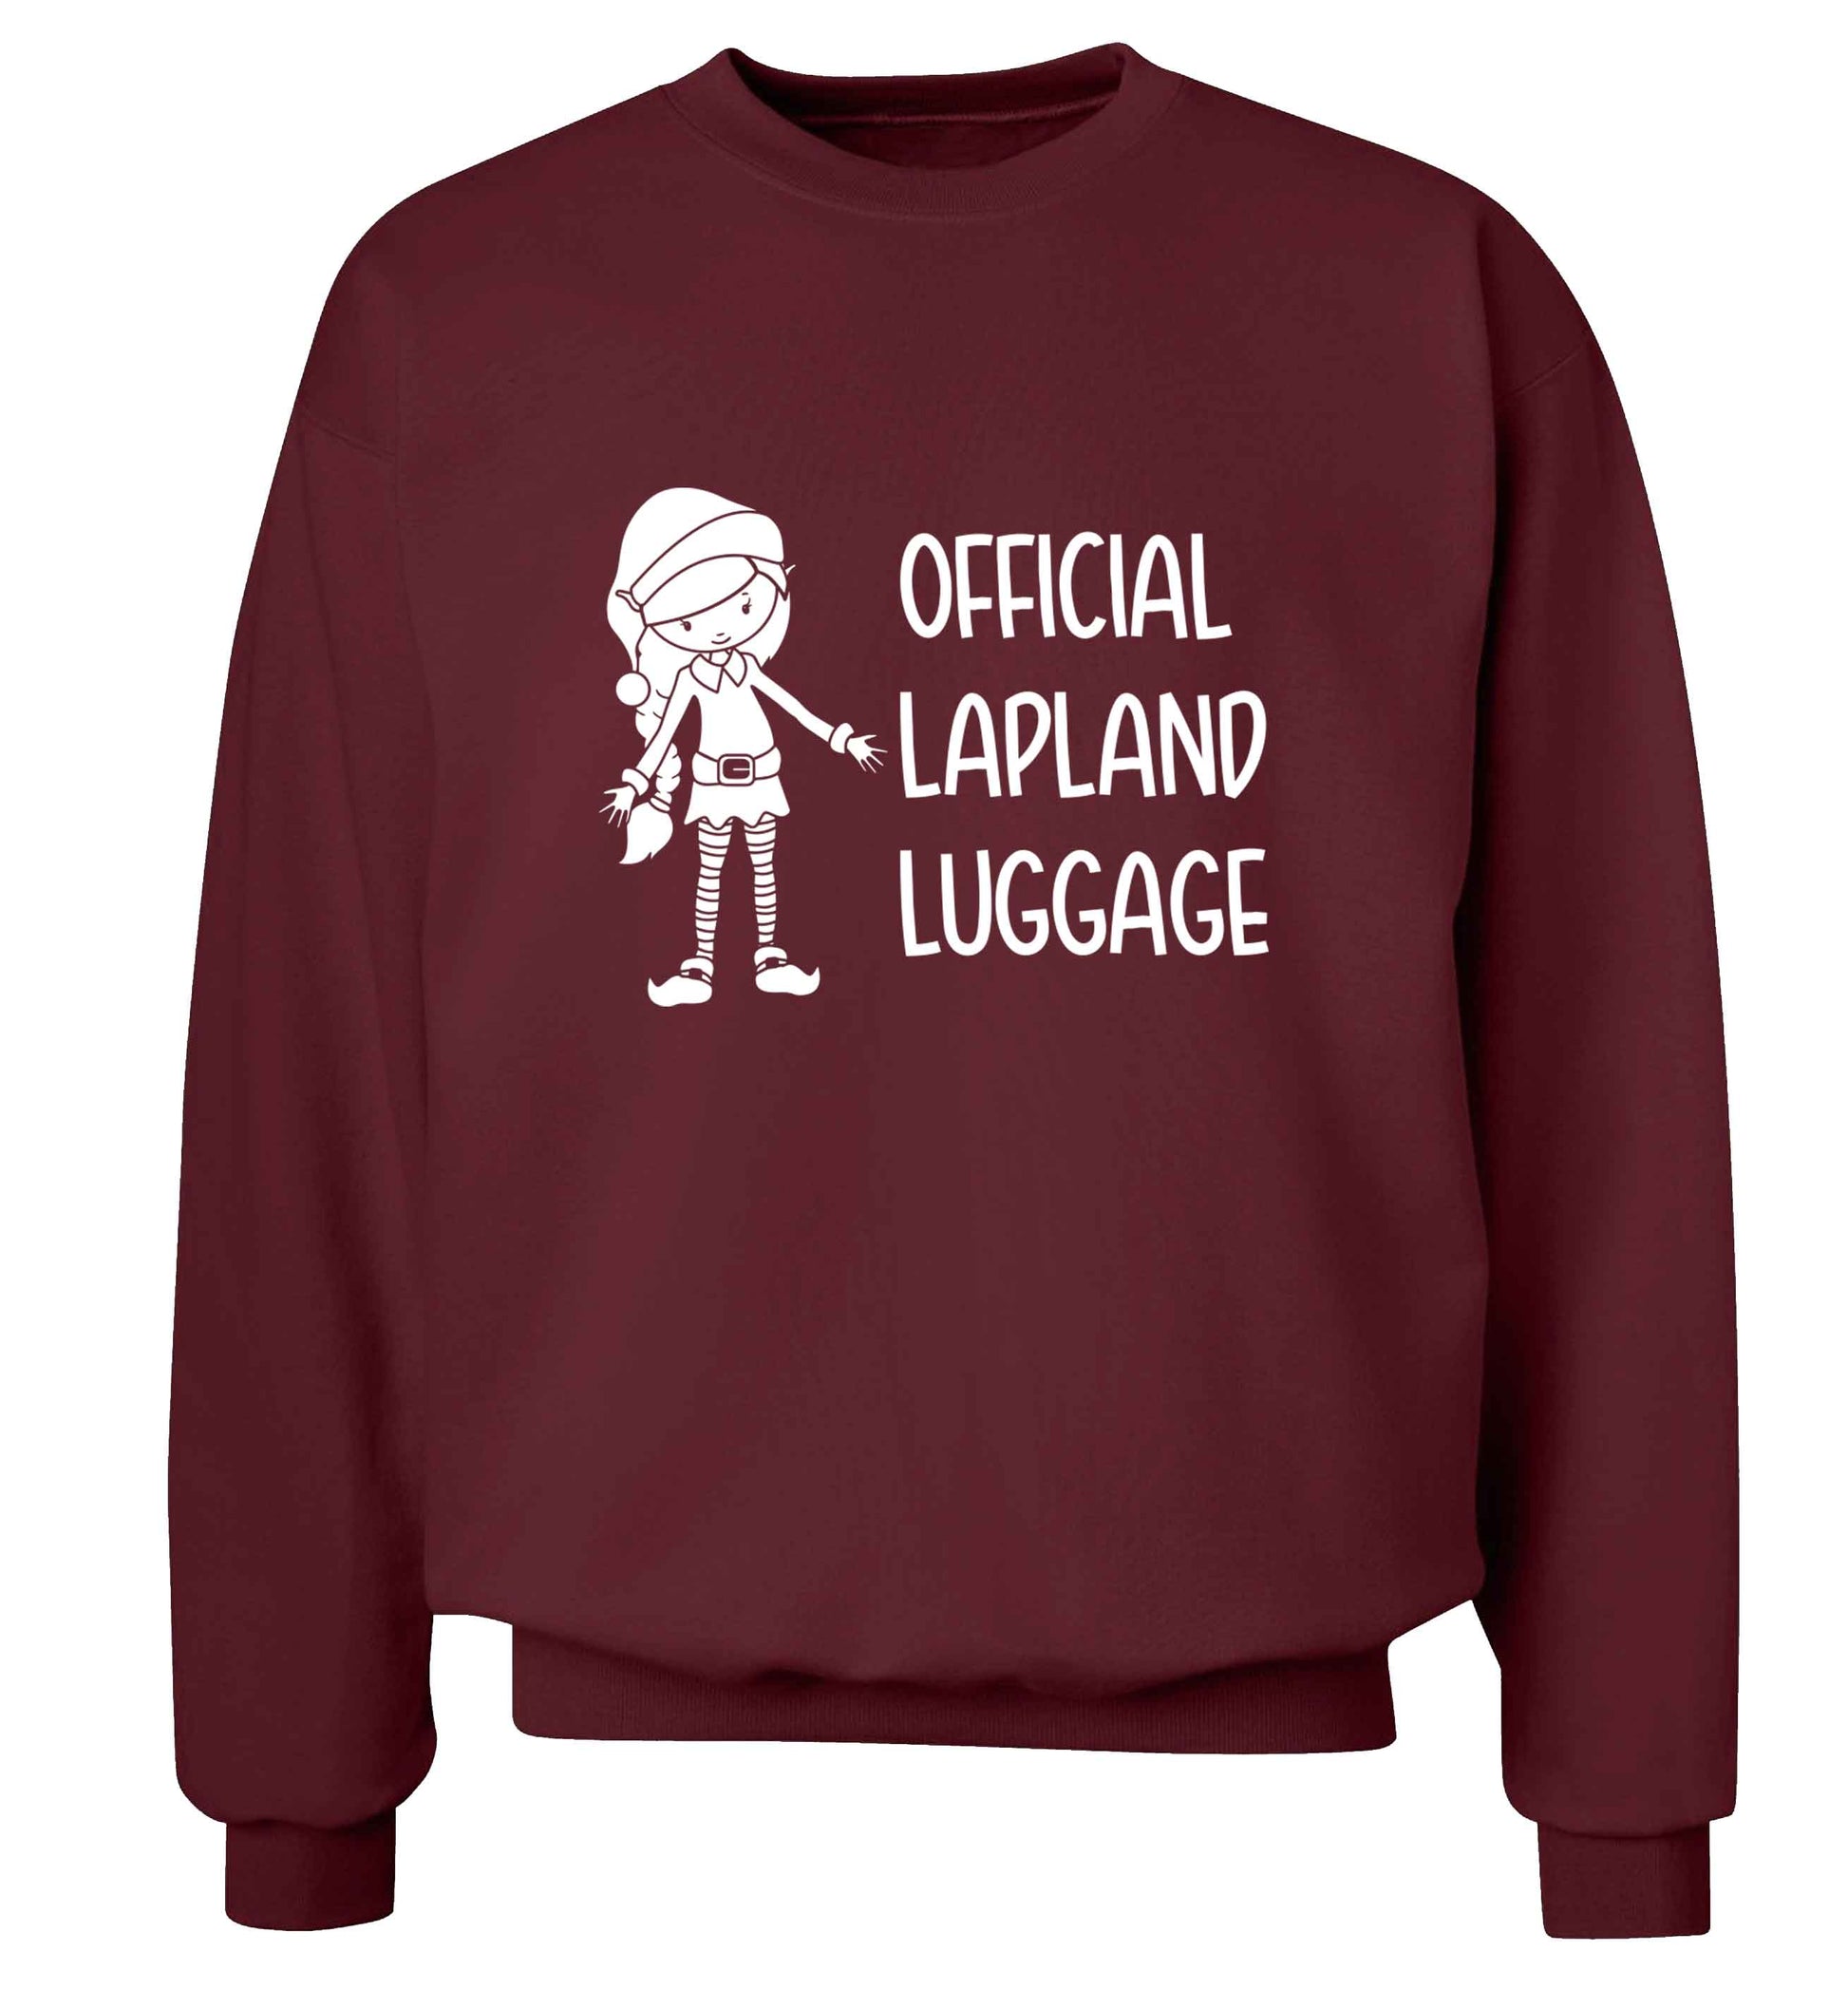 Official lapland luggage - Elf snowflake adult's unisex maroon sweater 2XL